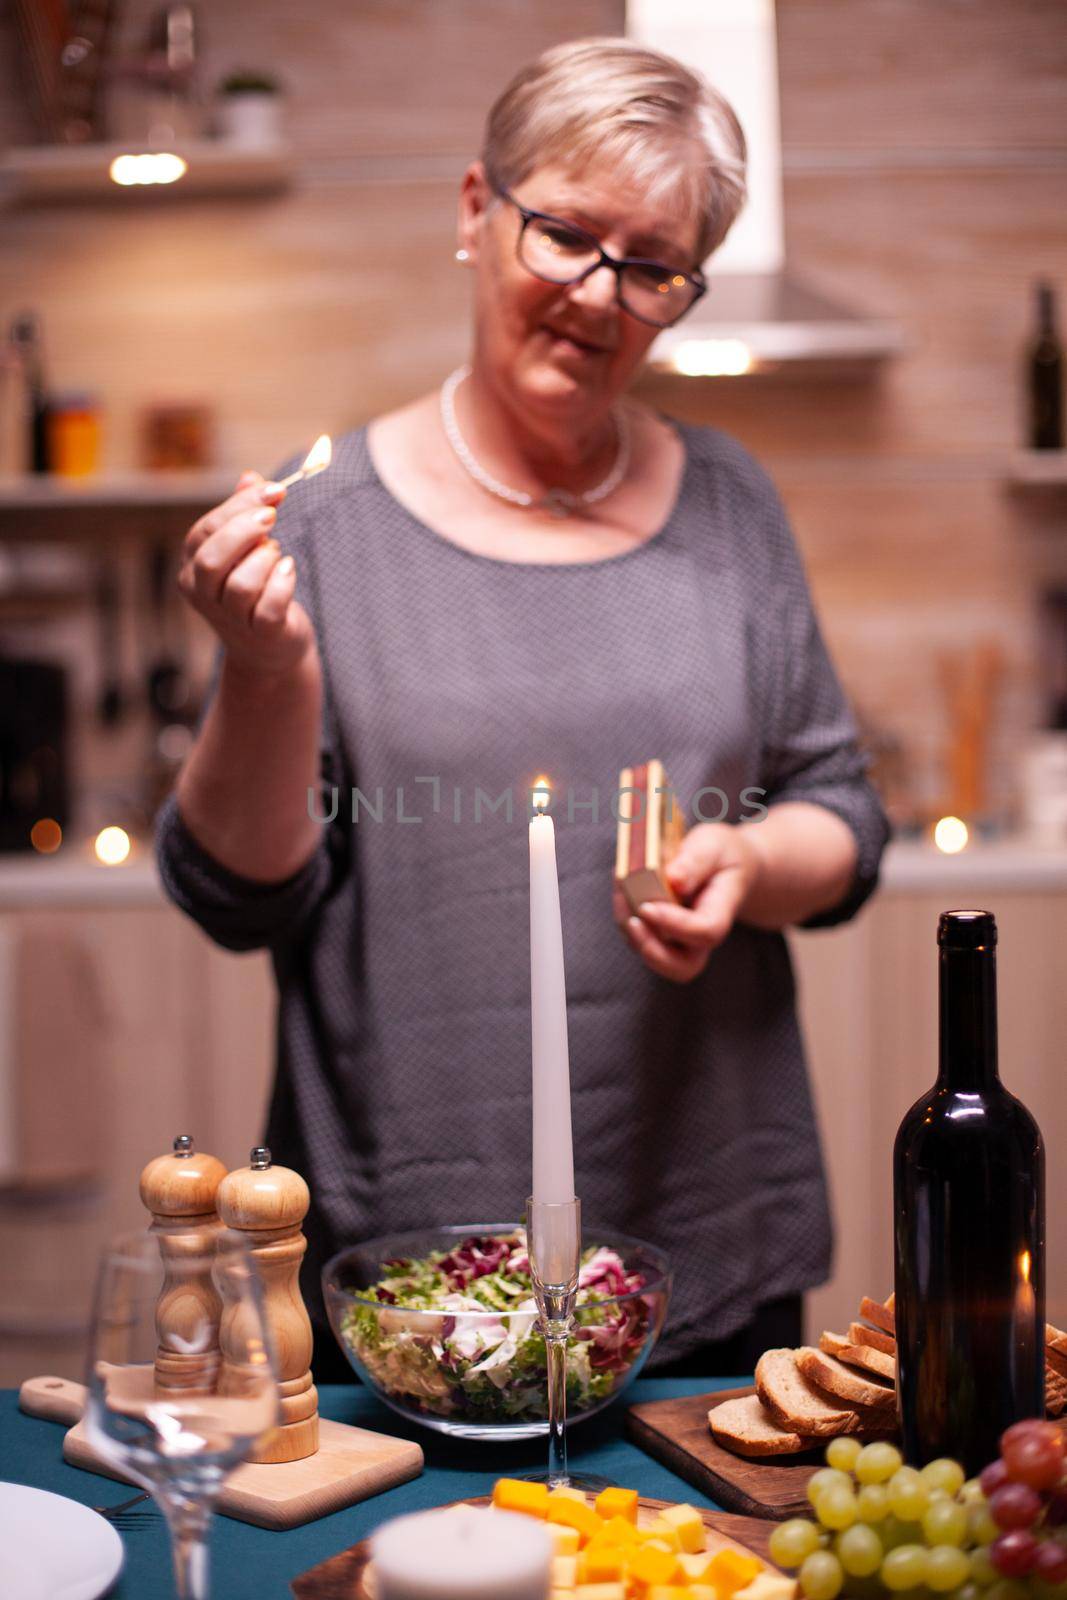 Wife looking at burning candle by DCStudio